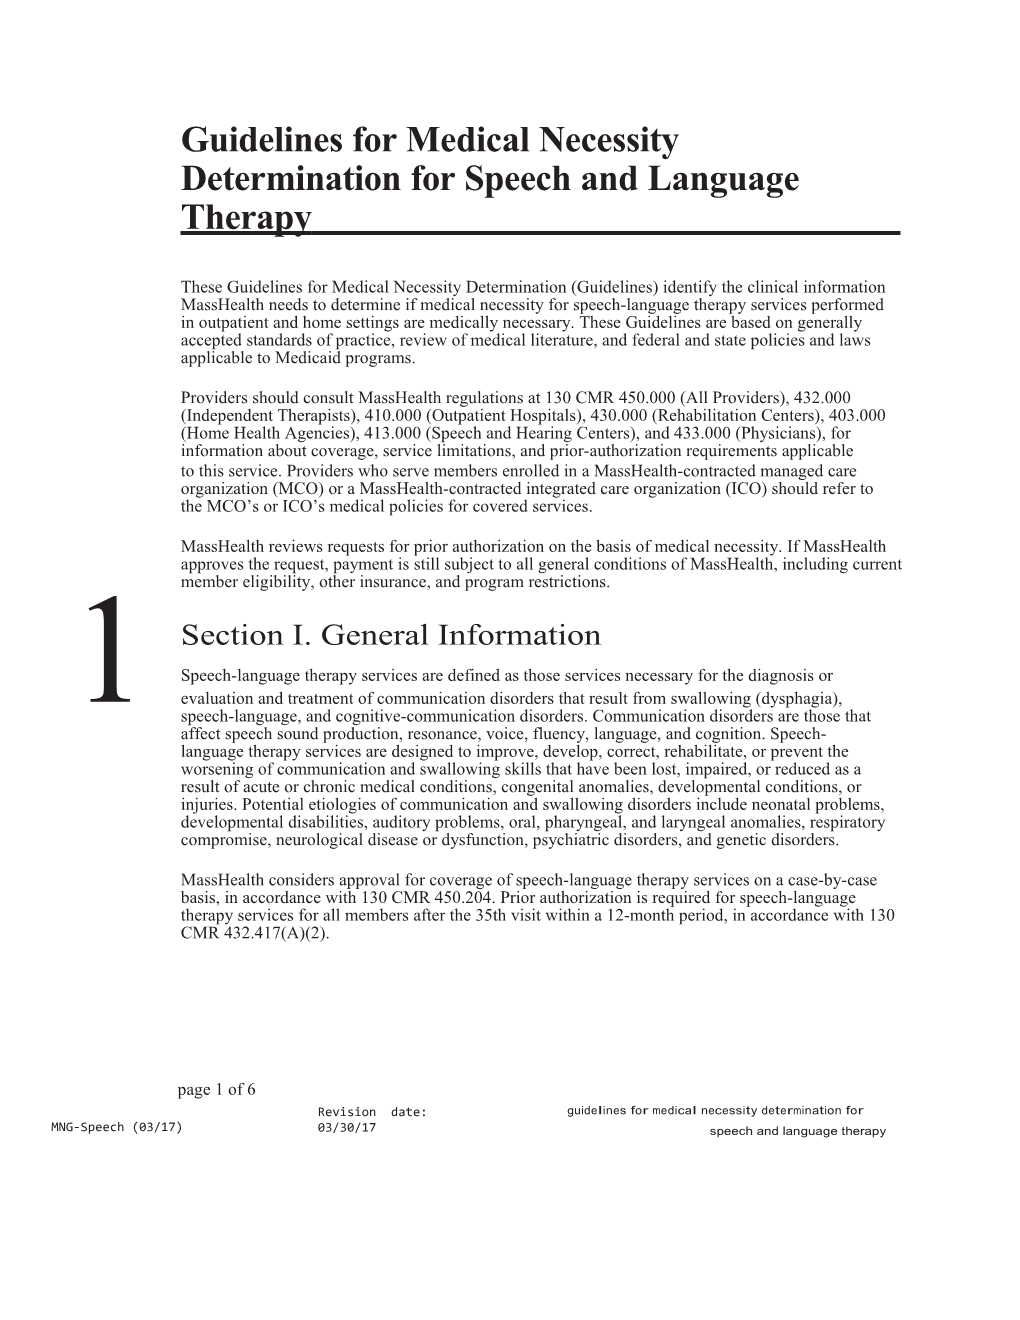 Guidelines for Medical Necessity Determination for Speech and Language Therapy